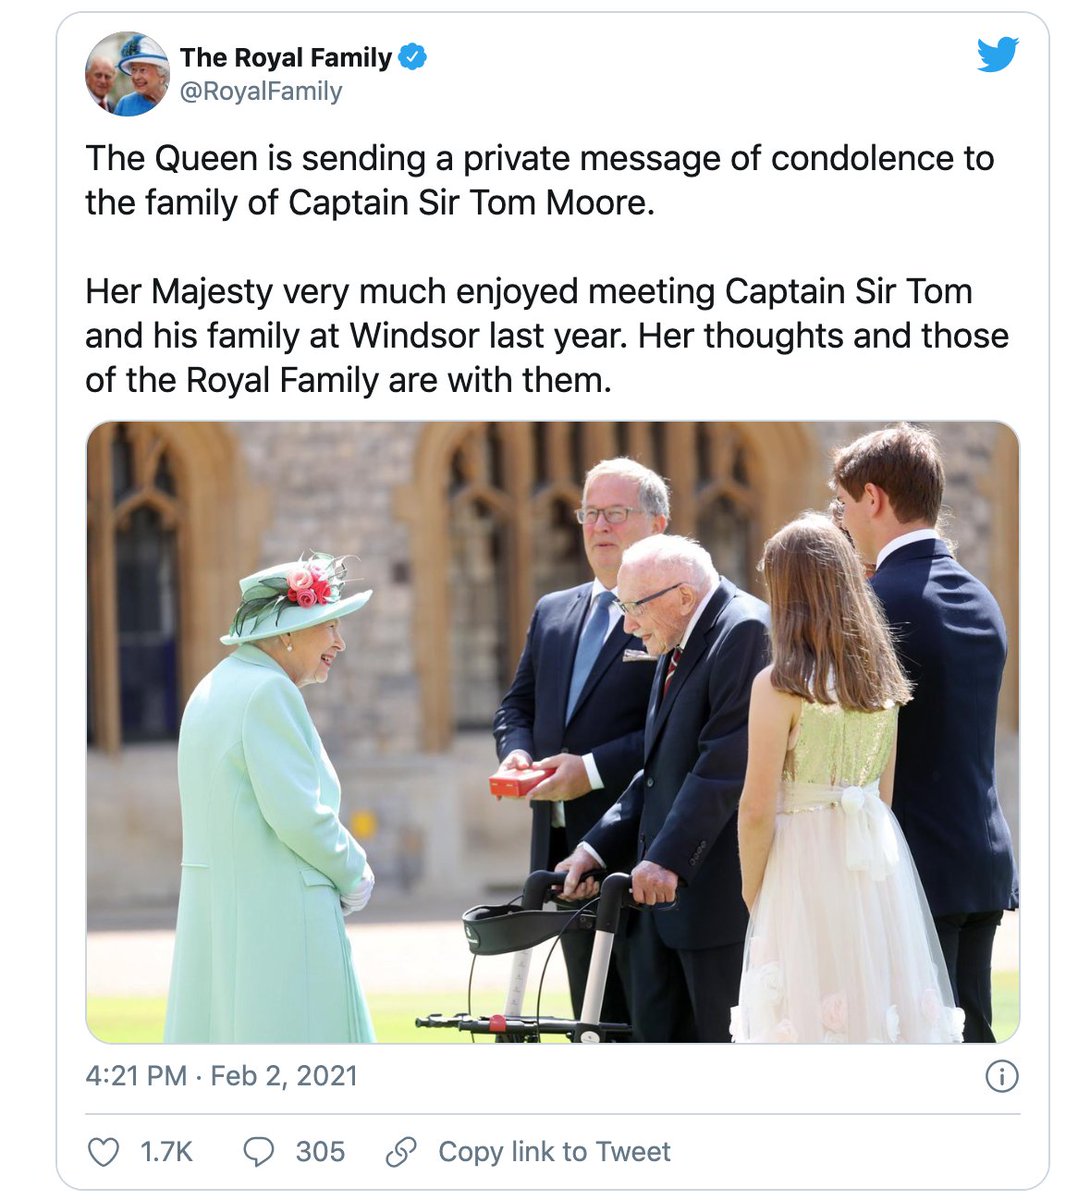 Her Majesty has sent a personal, private message to the family of Captain Tom